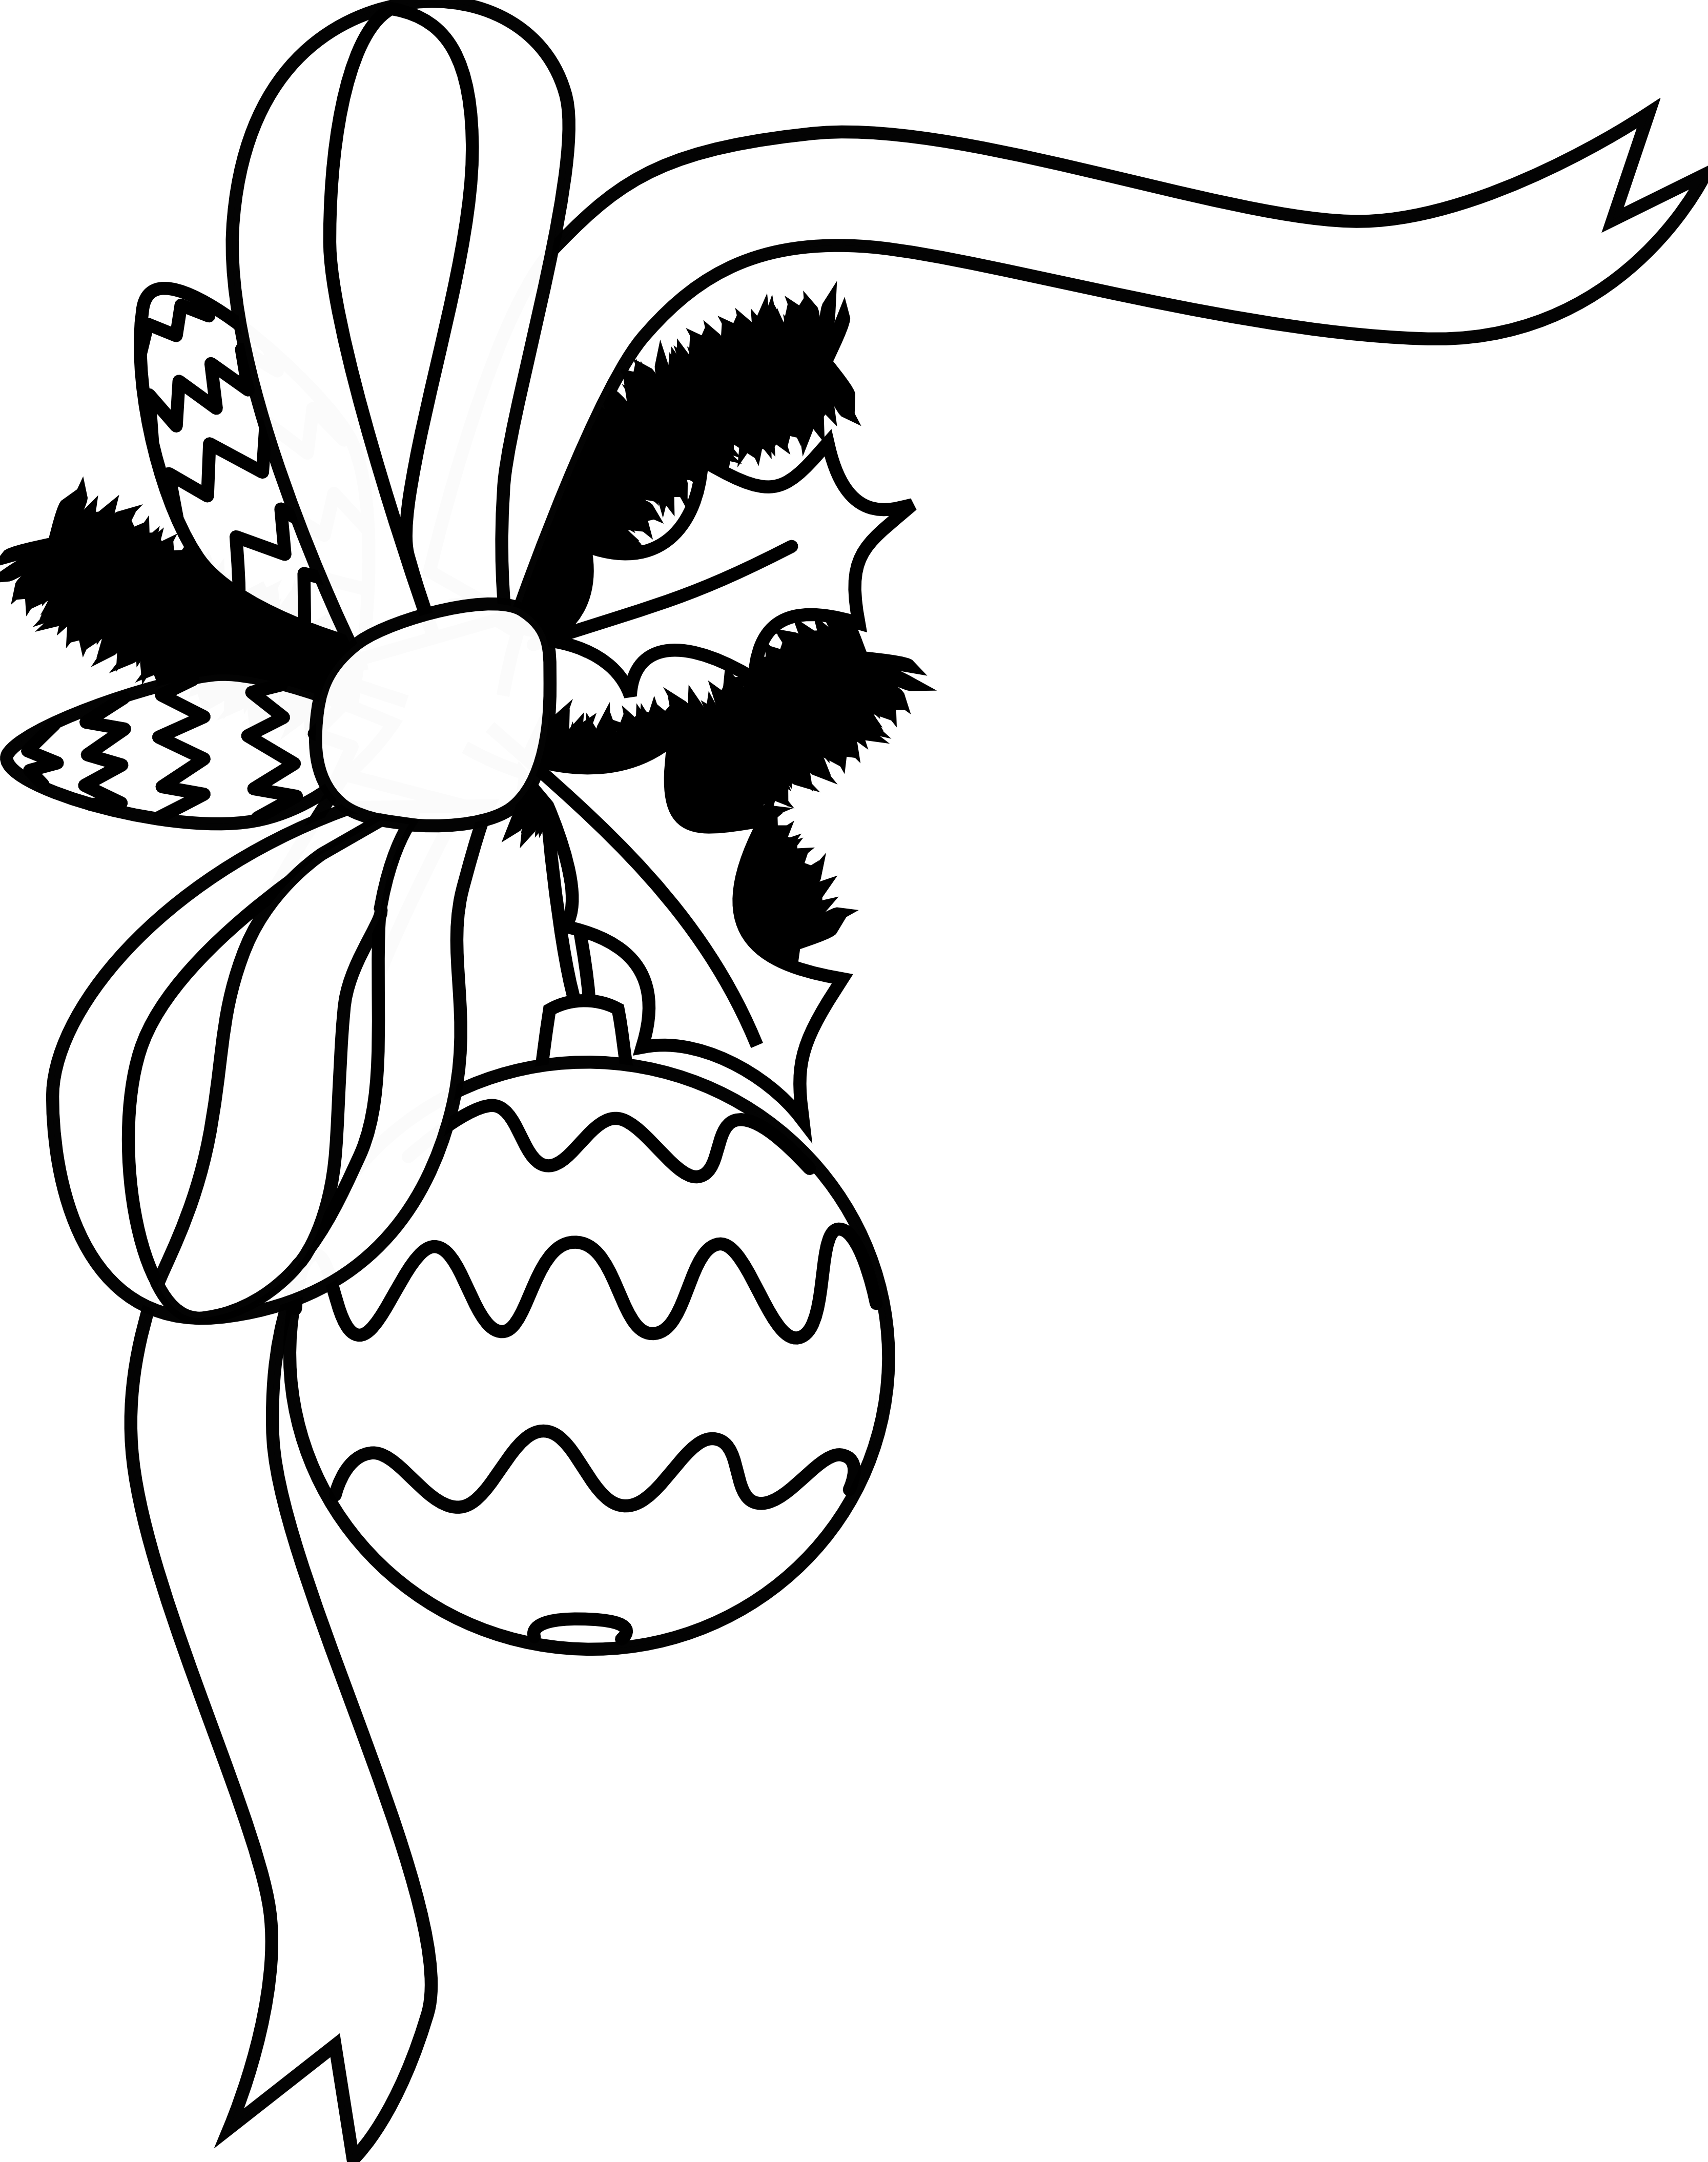 Net Clipart Black And White - Free Clipart Images